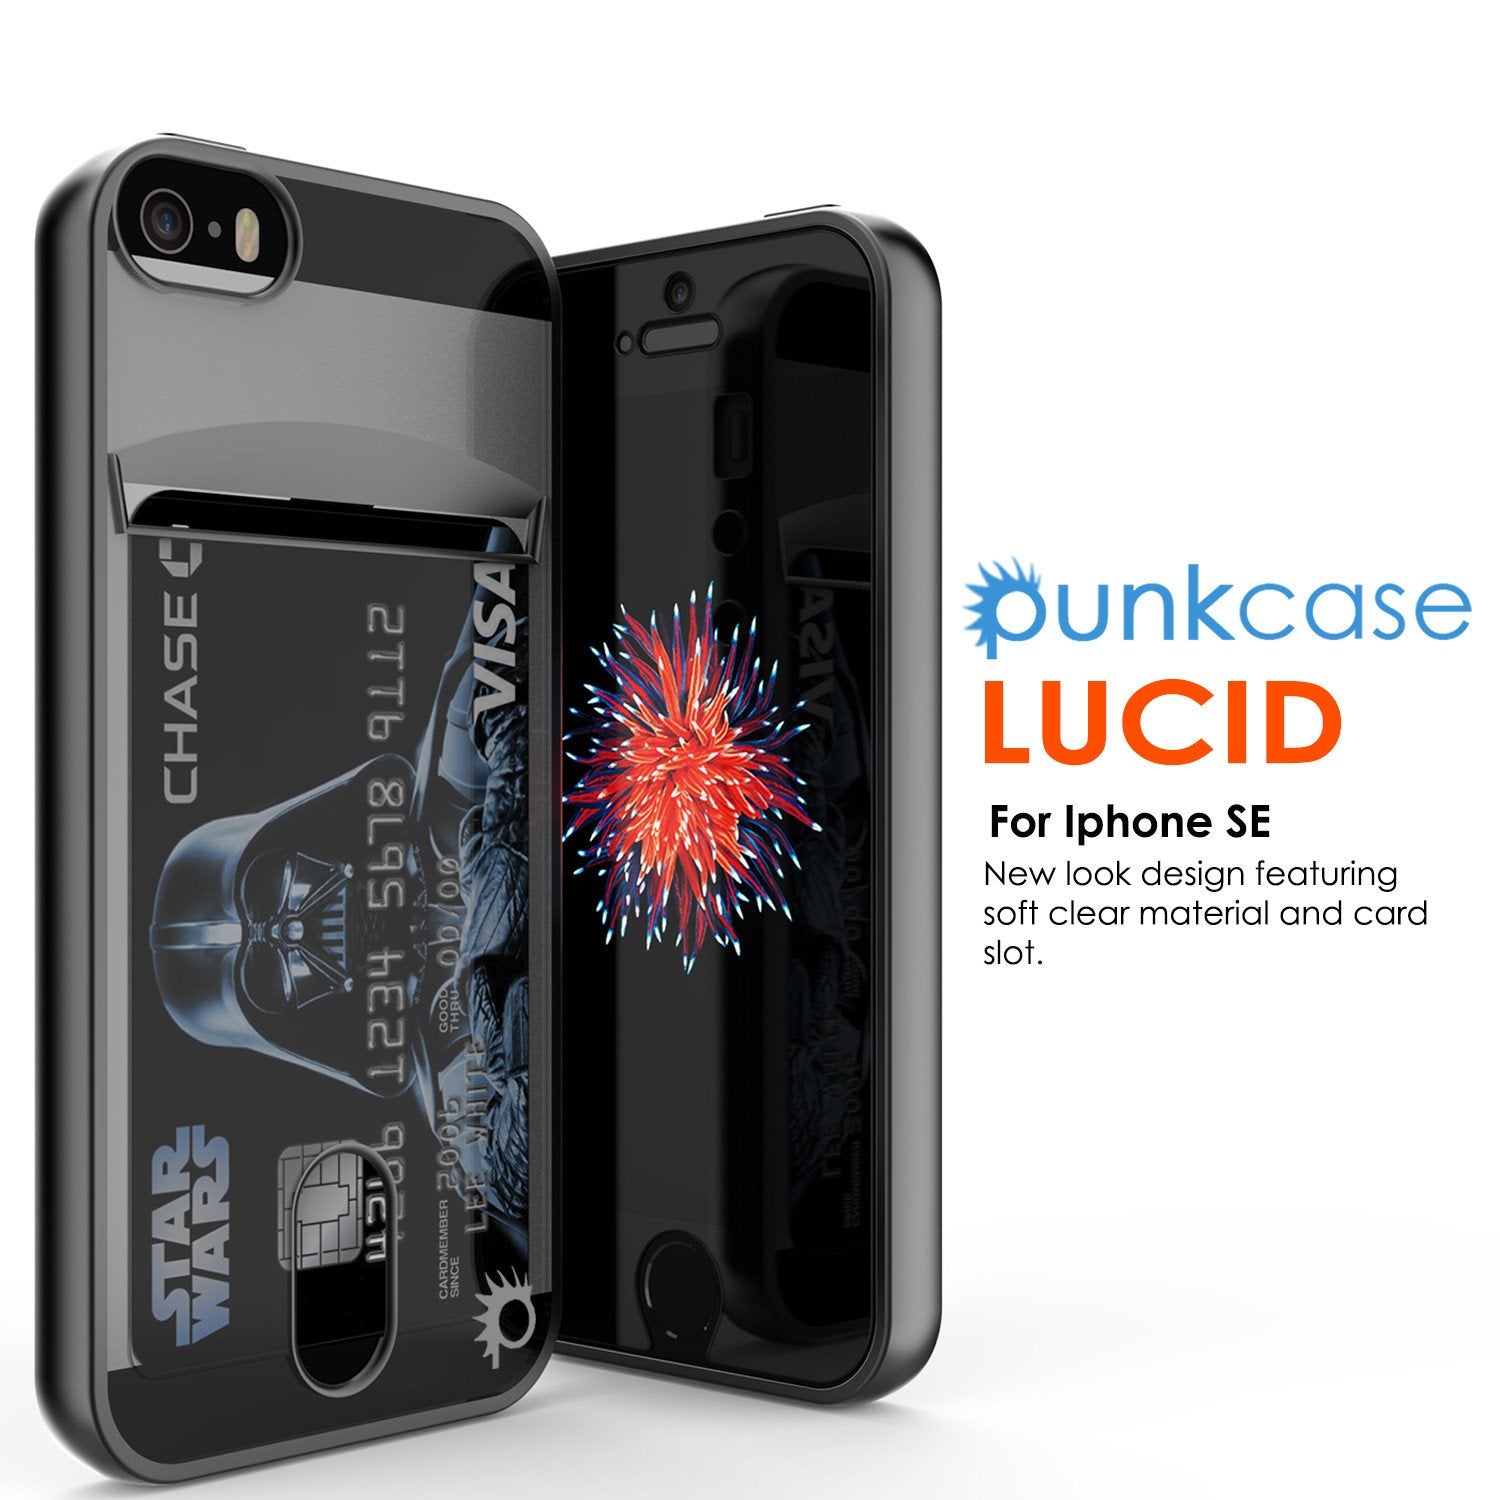 iPhone SE/5S/5 Case, PUNKCASE® LUCID Black Series | Card Slot | SHIELD Screen Protector | Ultra fit